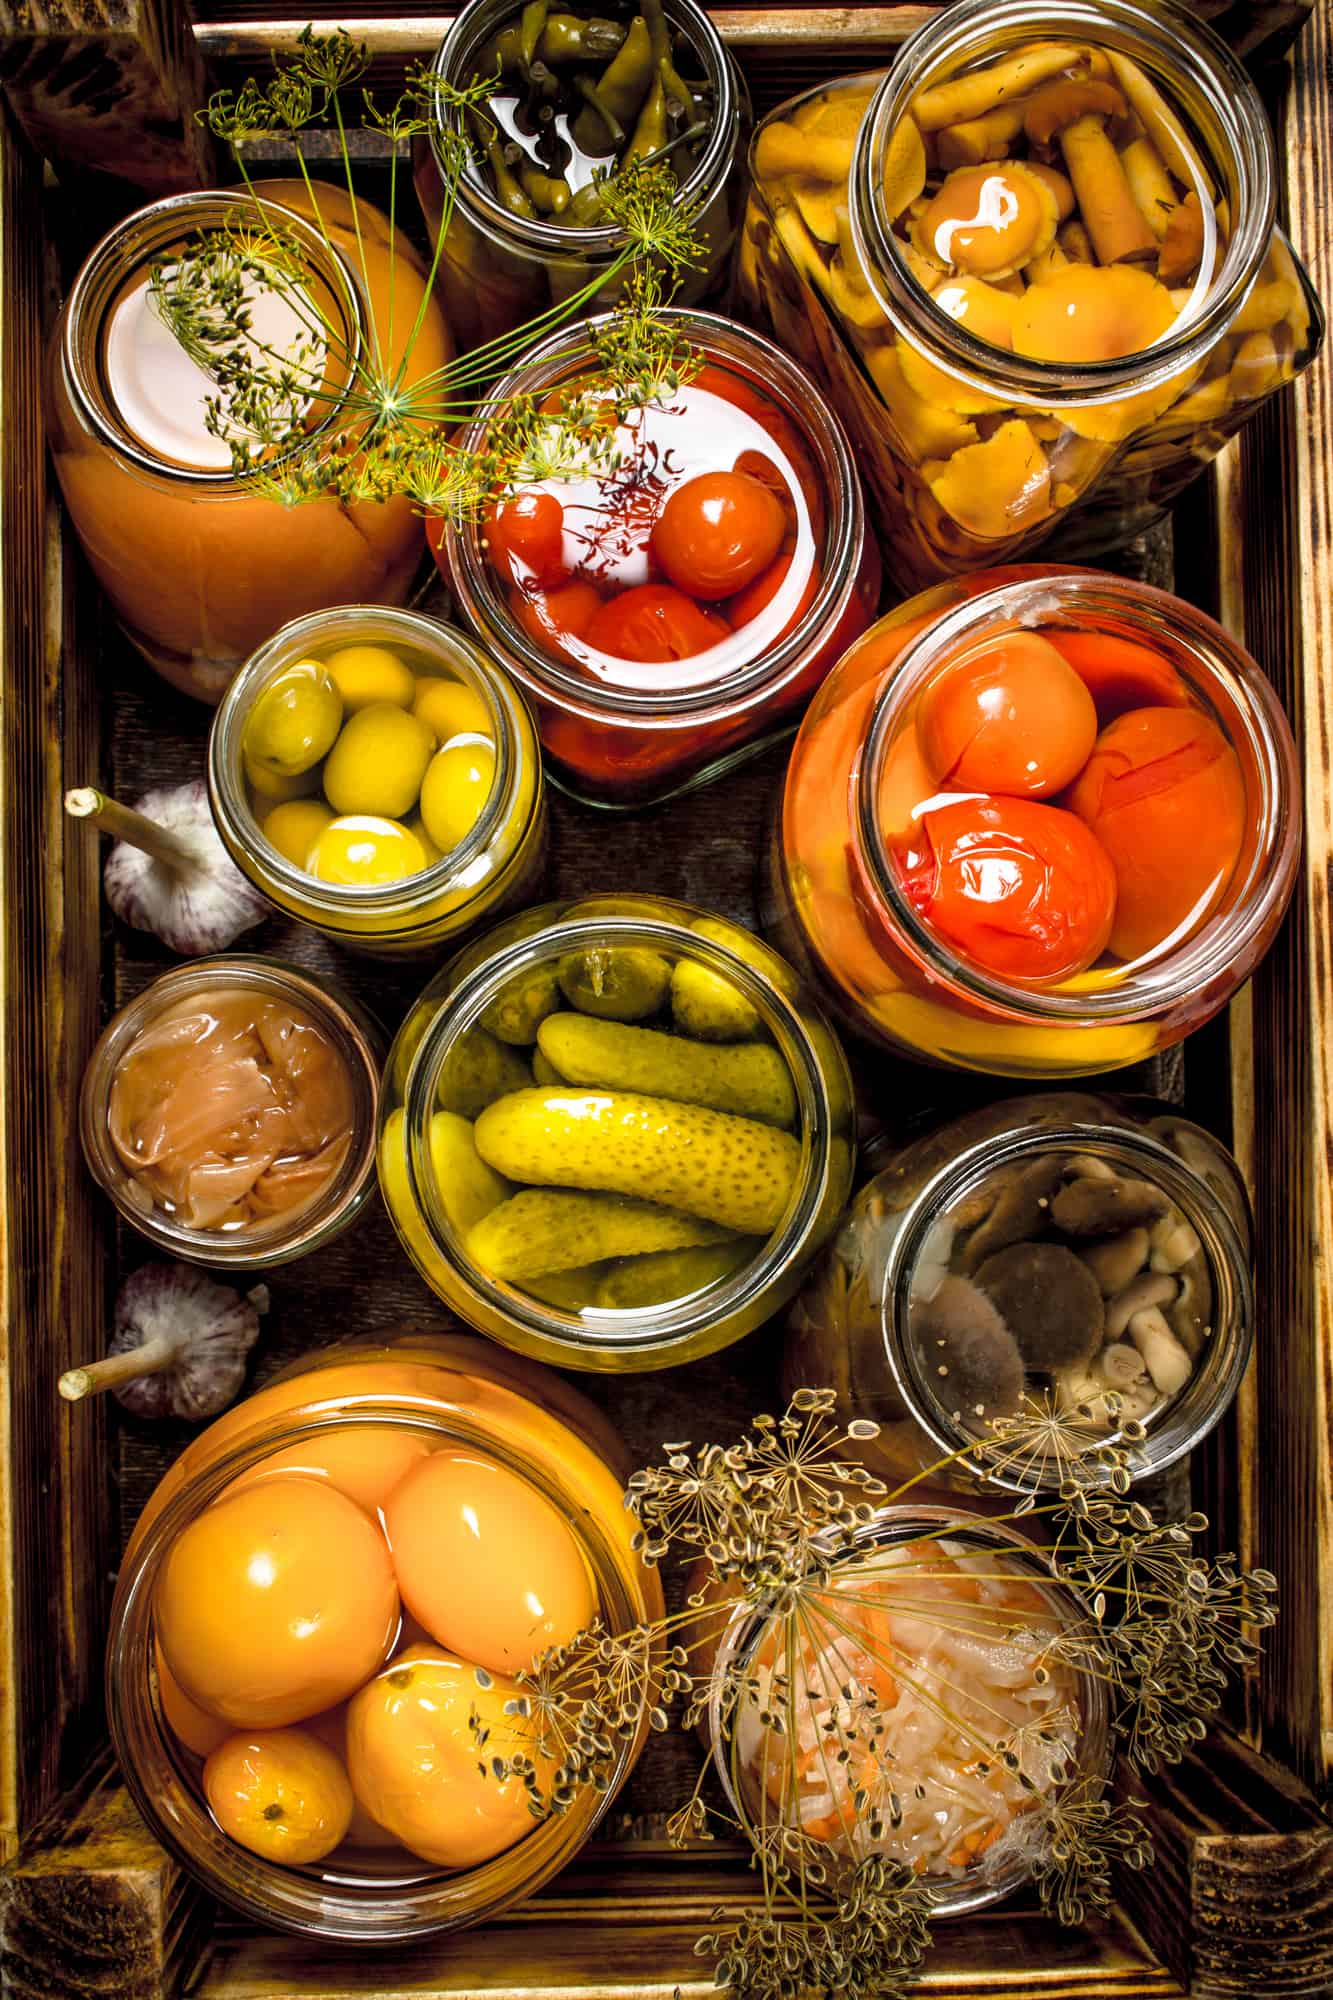 Preserves mushrooms and vegetables in a box.